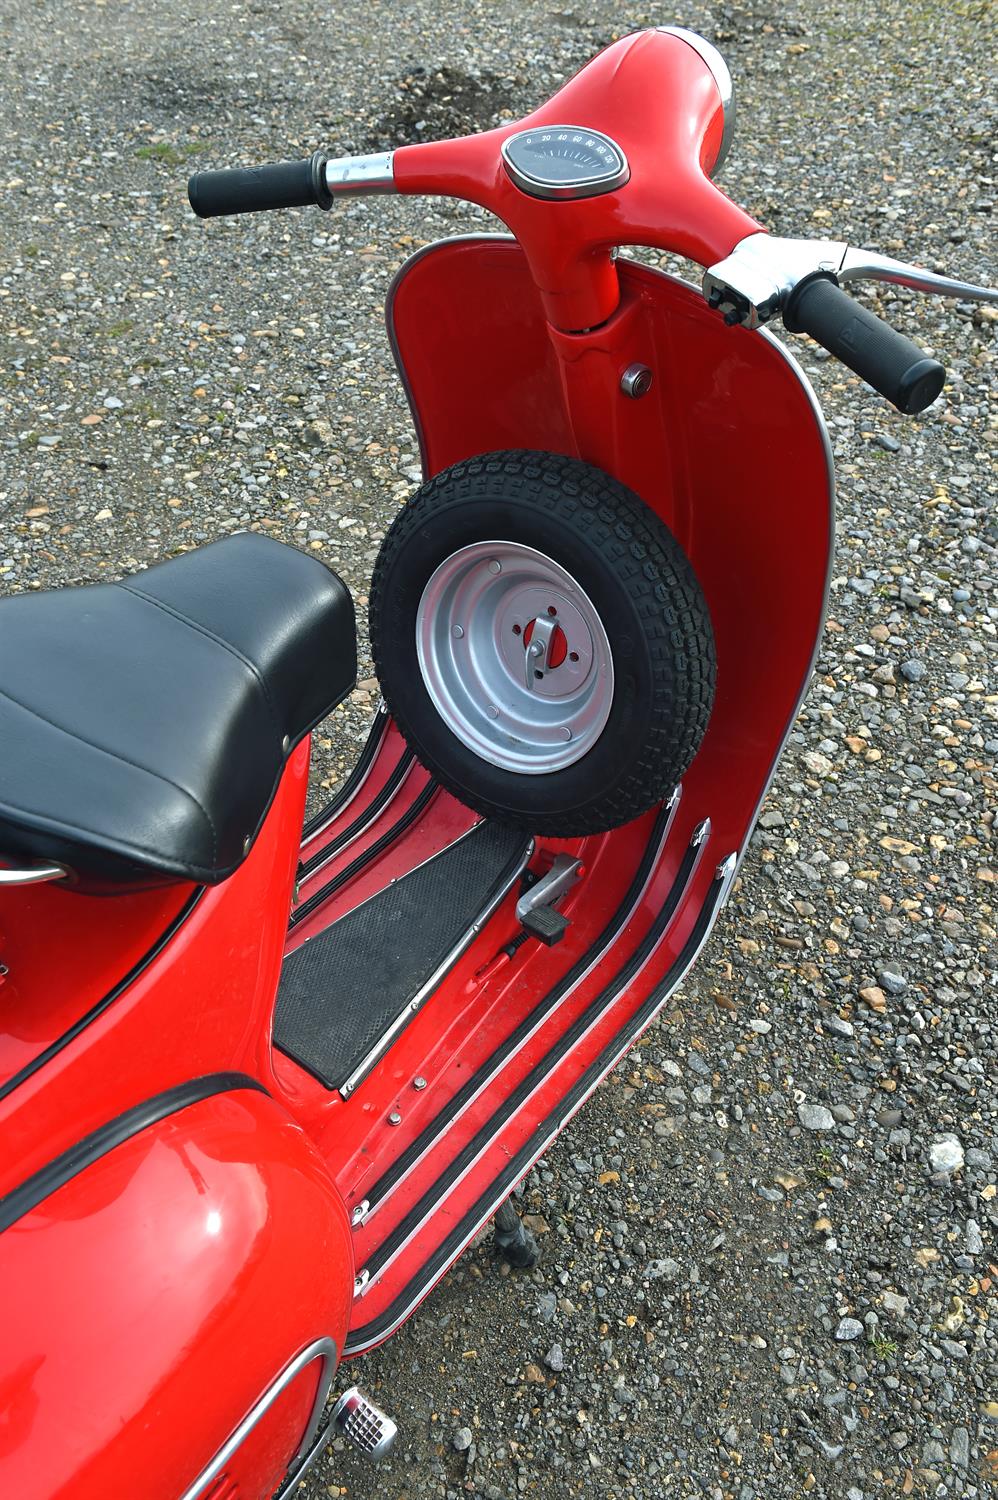 1961 Vespa VBB Standard 150cc 4 Speed. Registration number: 864 XVN. It was imported into the UK - Image 4 of 9